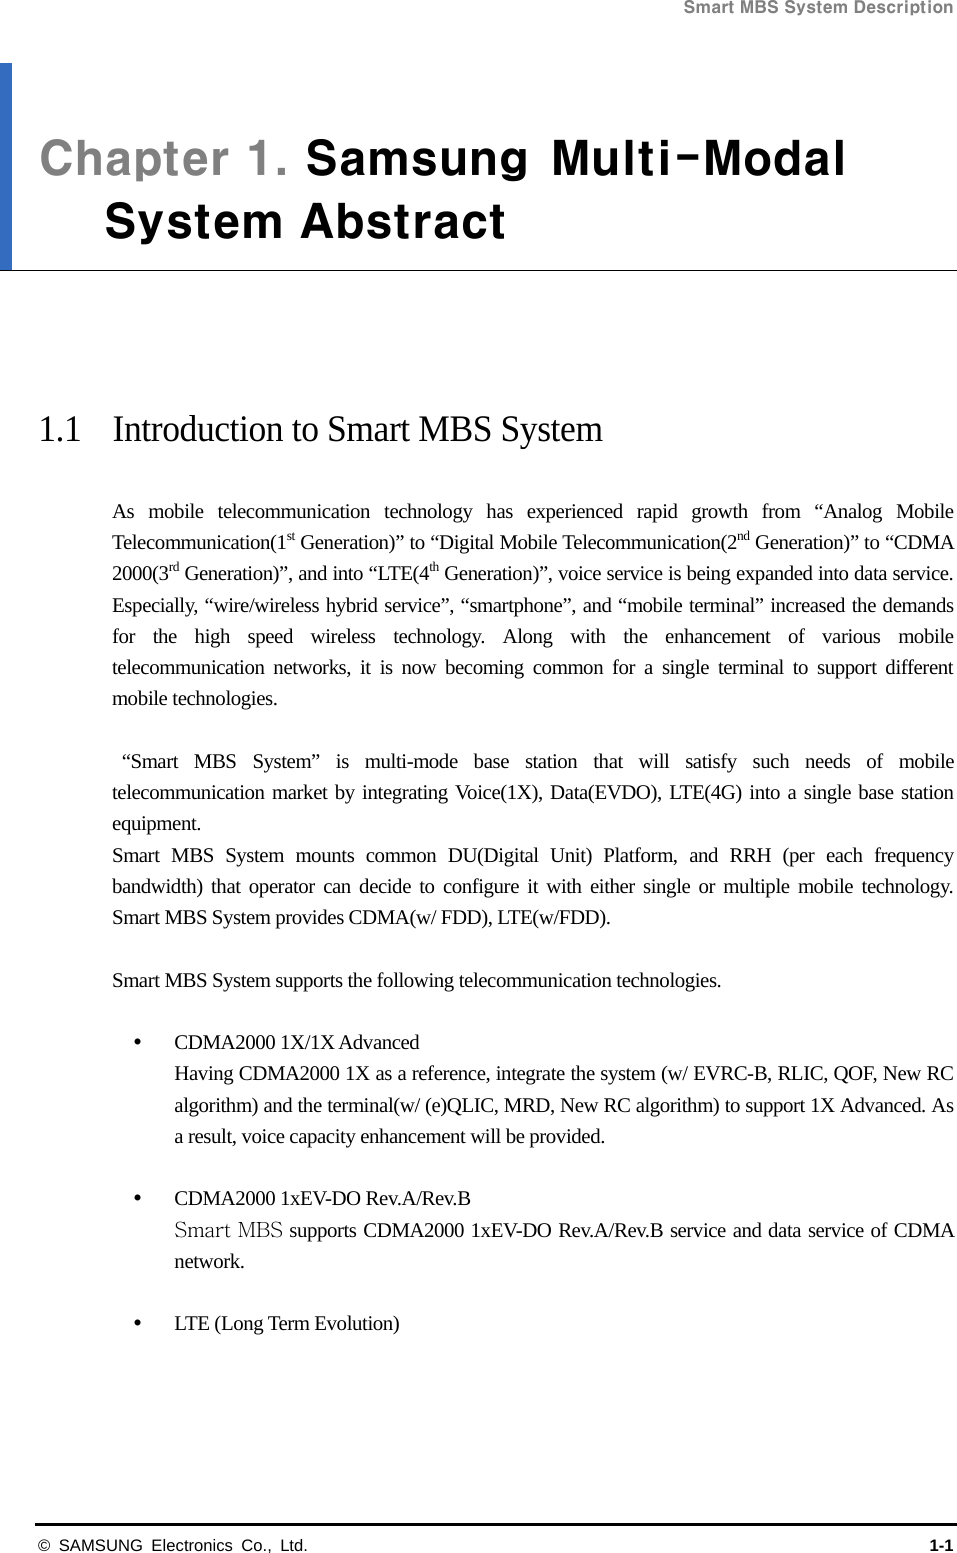 Smart MBS System Description   © SAMSUNG Electronics Co., Ltd.  1-1 Chapter 1. Samsung  Multi-ModalSystem Abstract     1.1  Introduction to Smart MBS System  As mobile telecommunication technology has experienced rapid growth from “Analog Mobile Telecommunication(1st Generation)” to “Digital Mobile Telecommunication(2nd Generation)” to “CDMA 2000(3rd Generation)”, and into “LTE(4th Generation)”, voice service is being expanded into data service. Especially, “wire/wireless hybrid service”, “smartphone”, and “mobile terminal” increased the demands for the high speed wireless technology. Along with the enhancement of various mobile telecommunication networks, it is now becoming common for a single terminal to support different mobile technologies.   “Smart MBS System” is multi-mode base station that will satisfy such needs of mobile telecommunication market by integrating Voice(1X), Data(EVDO), LTE(4G) into a single base station equipment. Smart MBS System mounts common DU(Digital Unit) Platform, and RRH (per each frequency bandwidth) that operator can decide to configure it with either single or multiple mobile technology. Smart MBS System provides CDMA(w/ FDD), LTE(w/FDD).    Smart MBS System supports the following telecommunication technologies.   CDMA2000 1X/1X Advanced Having CDMA2000 1X as a reference, integrate the system (w/ EVRC-B, RLIC, QOF, New RC algorithm) and the terminal(w/ (e)QLIC, MRD, New RC algorithm) to support 1X Advanced. As a result, voice capacity enhancement will be provided.   CDMA2000 1xEV-DO Rev.A/Rev.B Smart MBS supports CDMA2000 1xEV-DO Rev.A/Rev.B service and data service of CDMA network.    LTE (Long Term Evolution) 